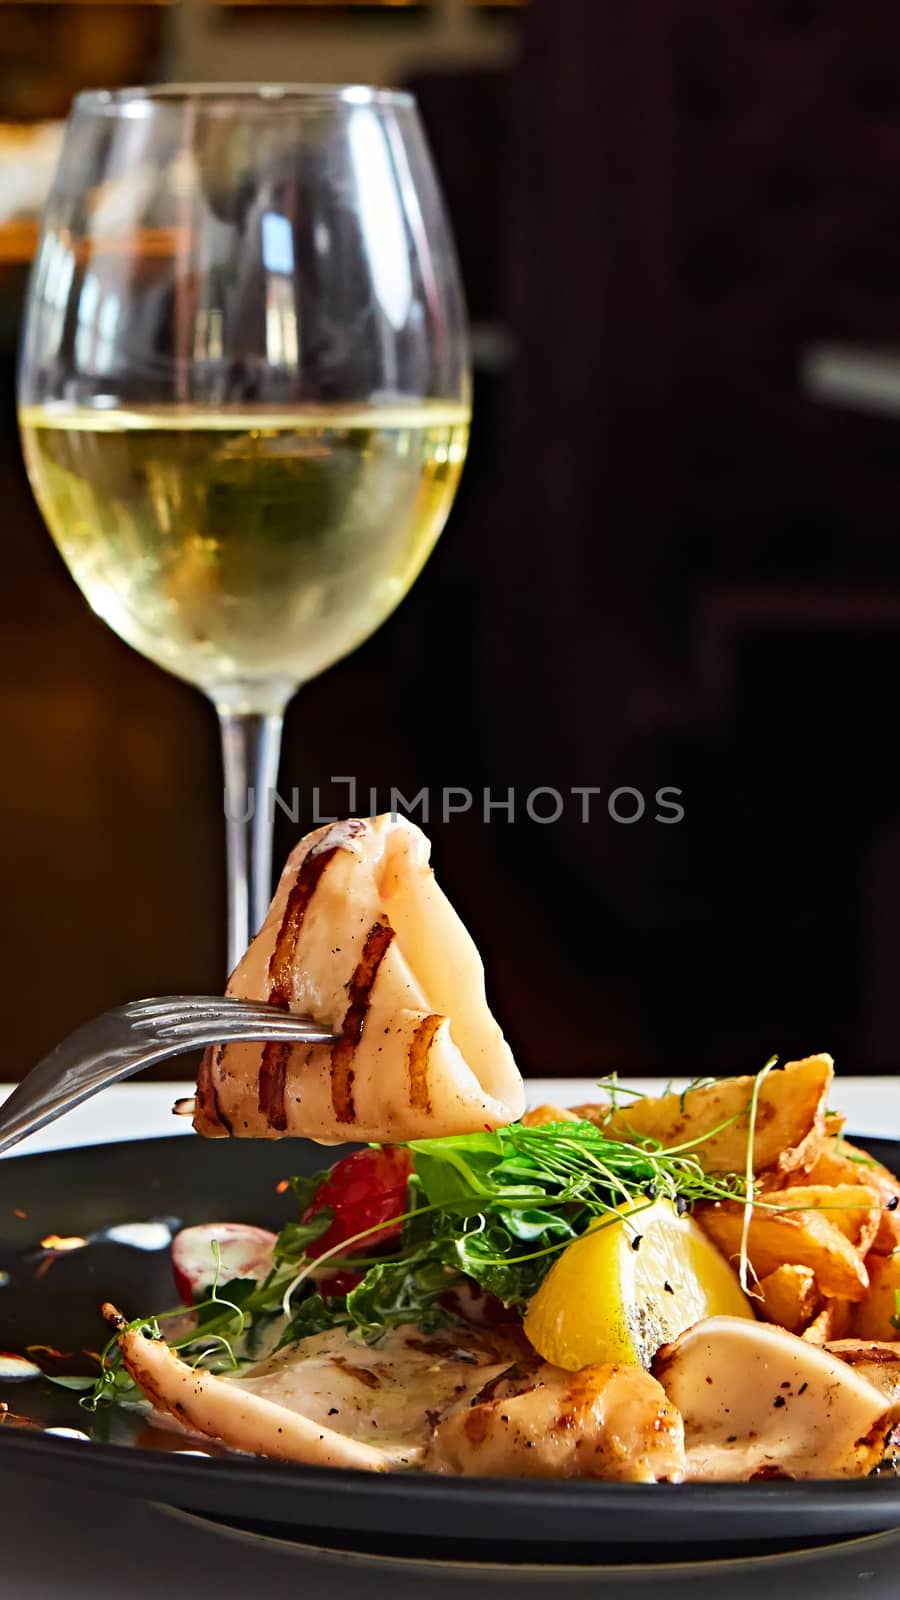 Grilled squid with salad. Shallow dof